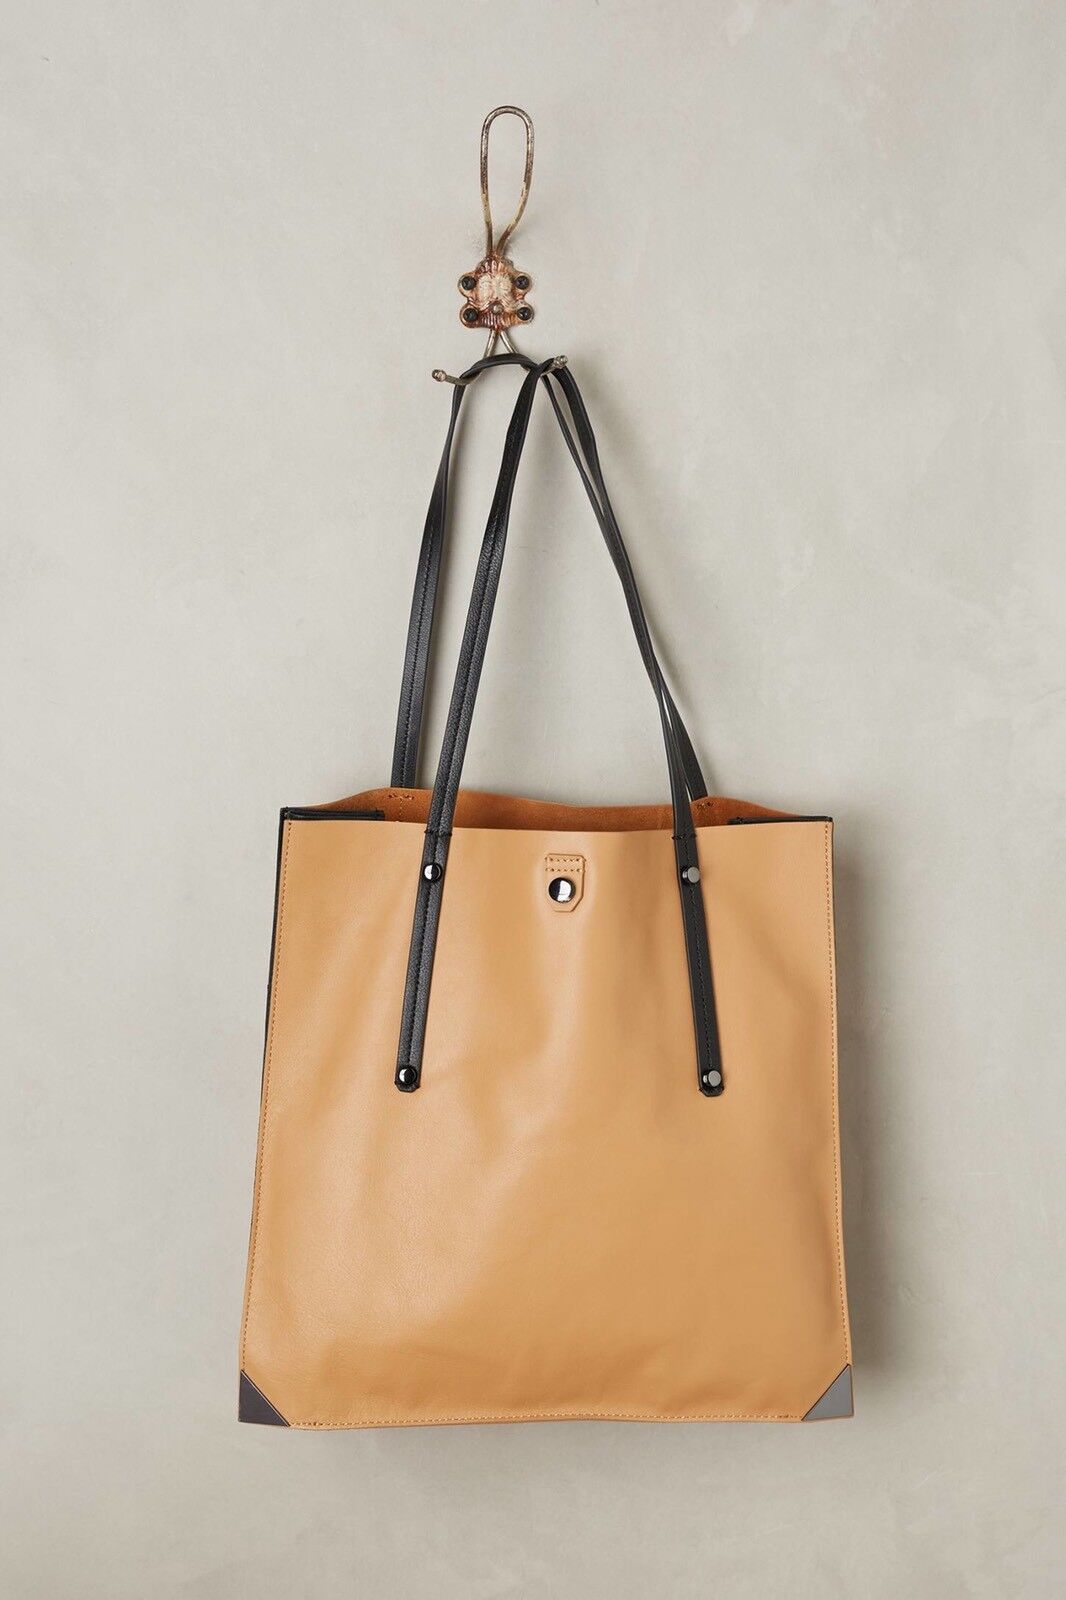 Anthropologie Botkier Jane Tote NEW MSRP: $298 Leather